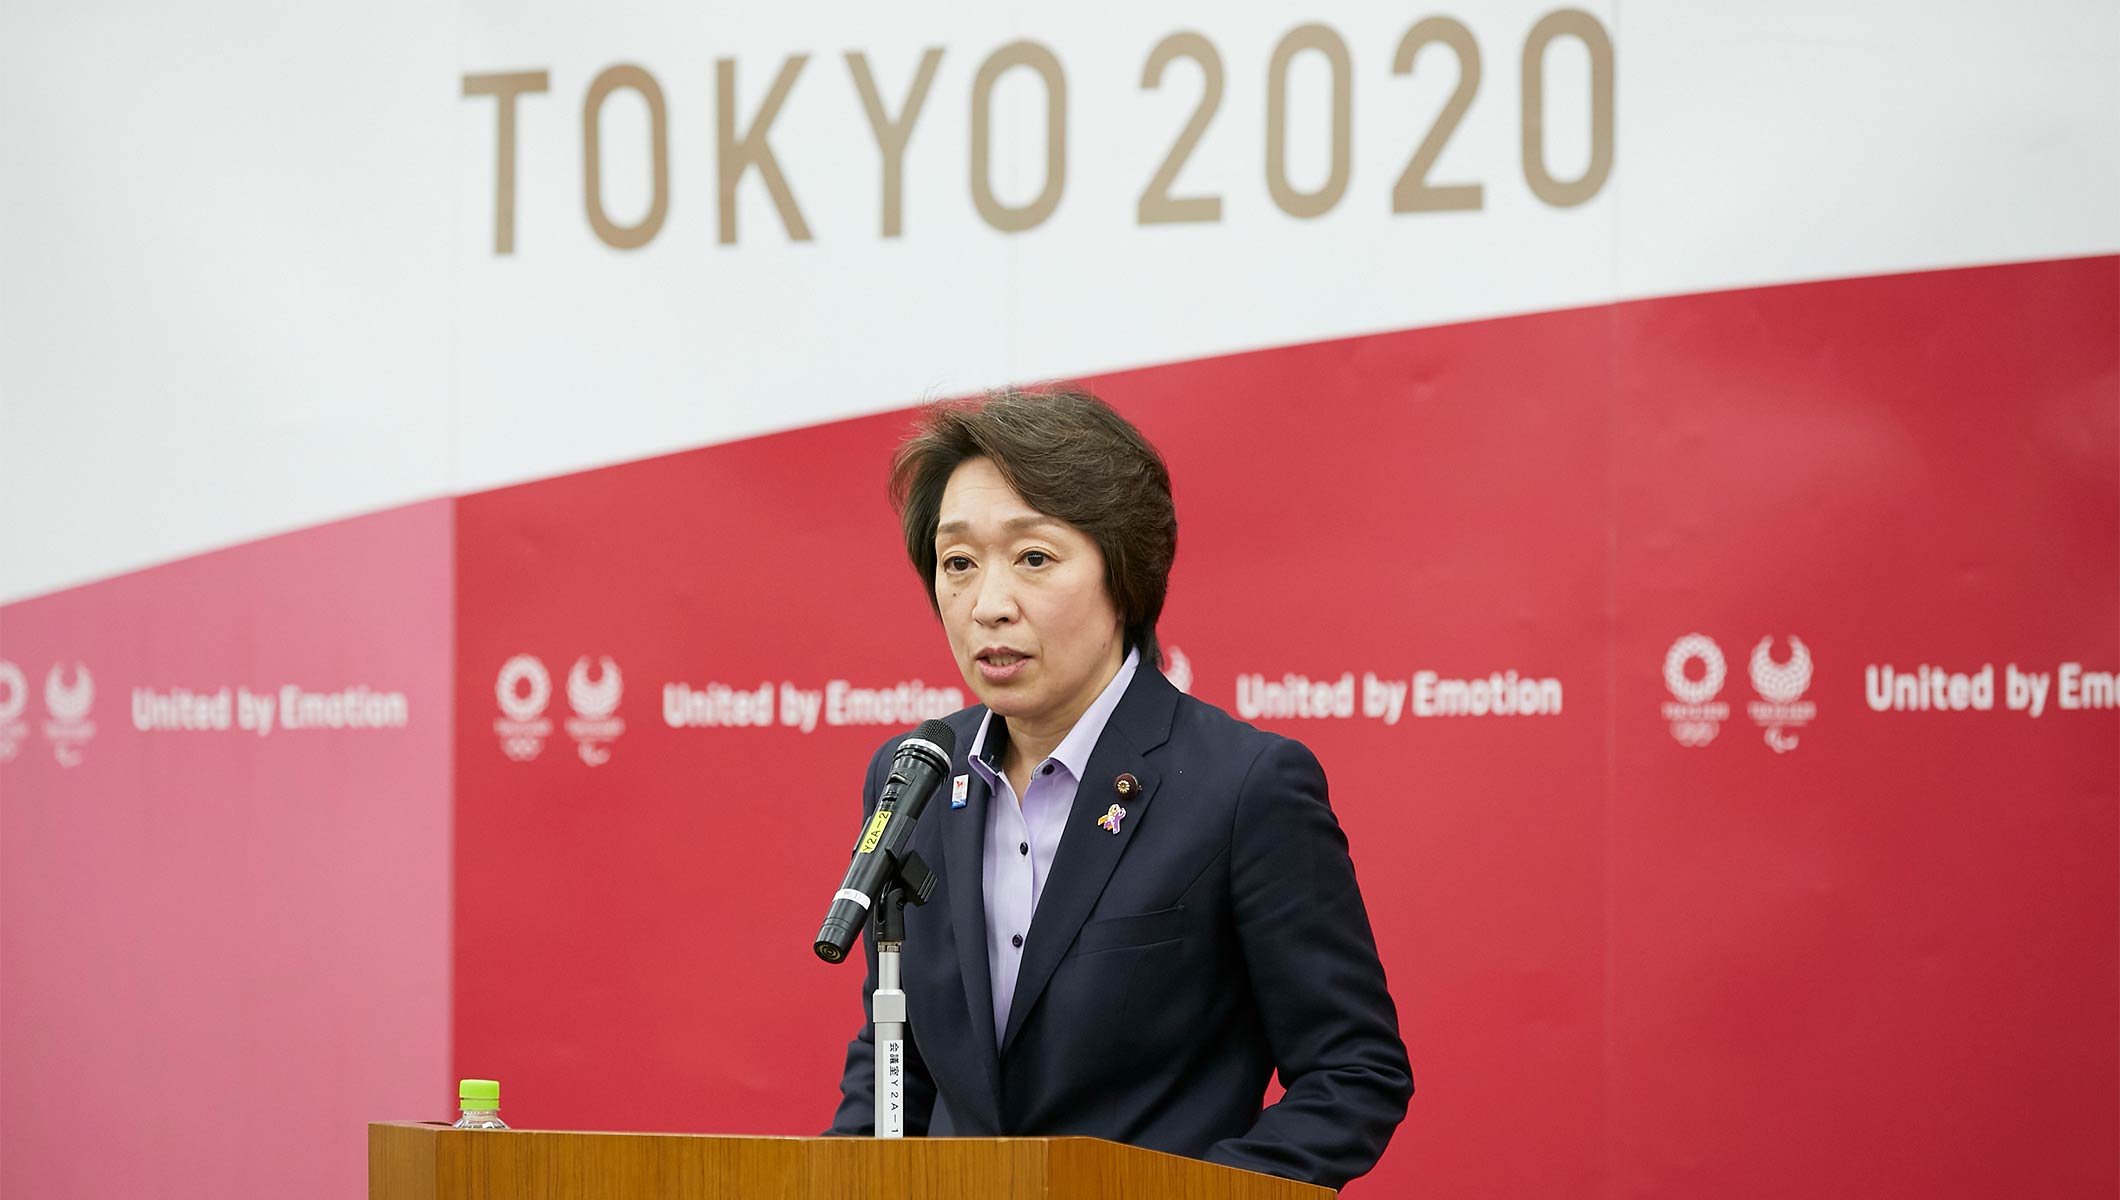 Tokyo 2020 President Hashimoto Seiko: “An opportunity to change the mindset  of the entire nation” - Olympic News